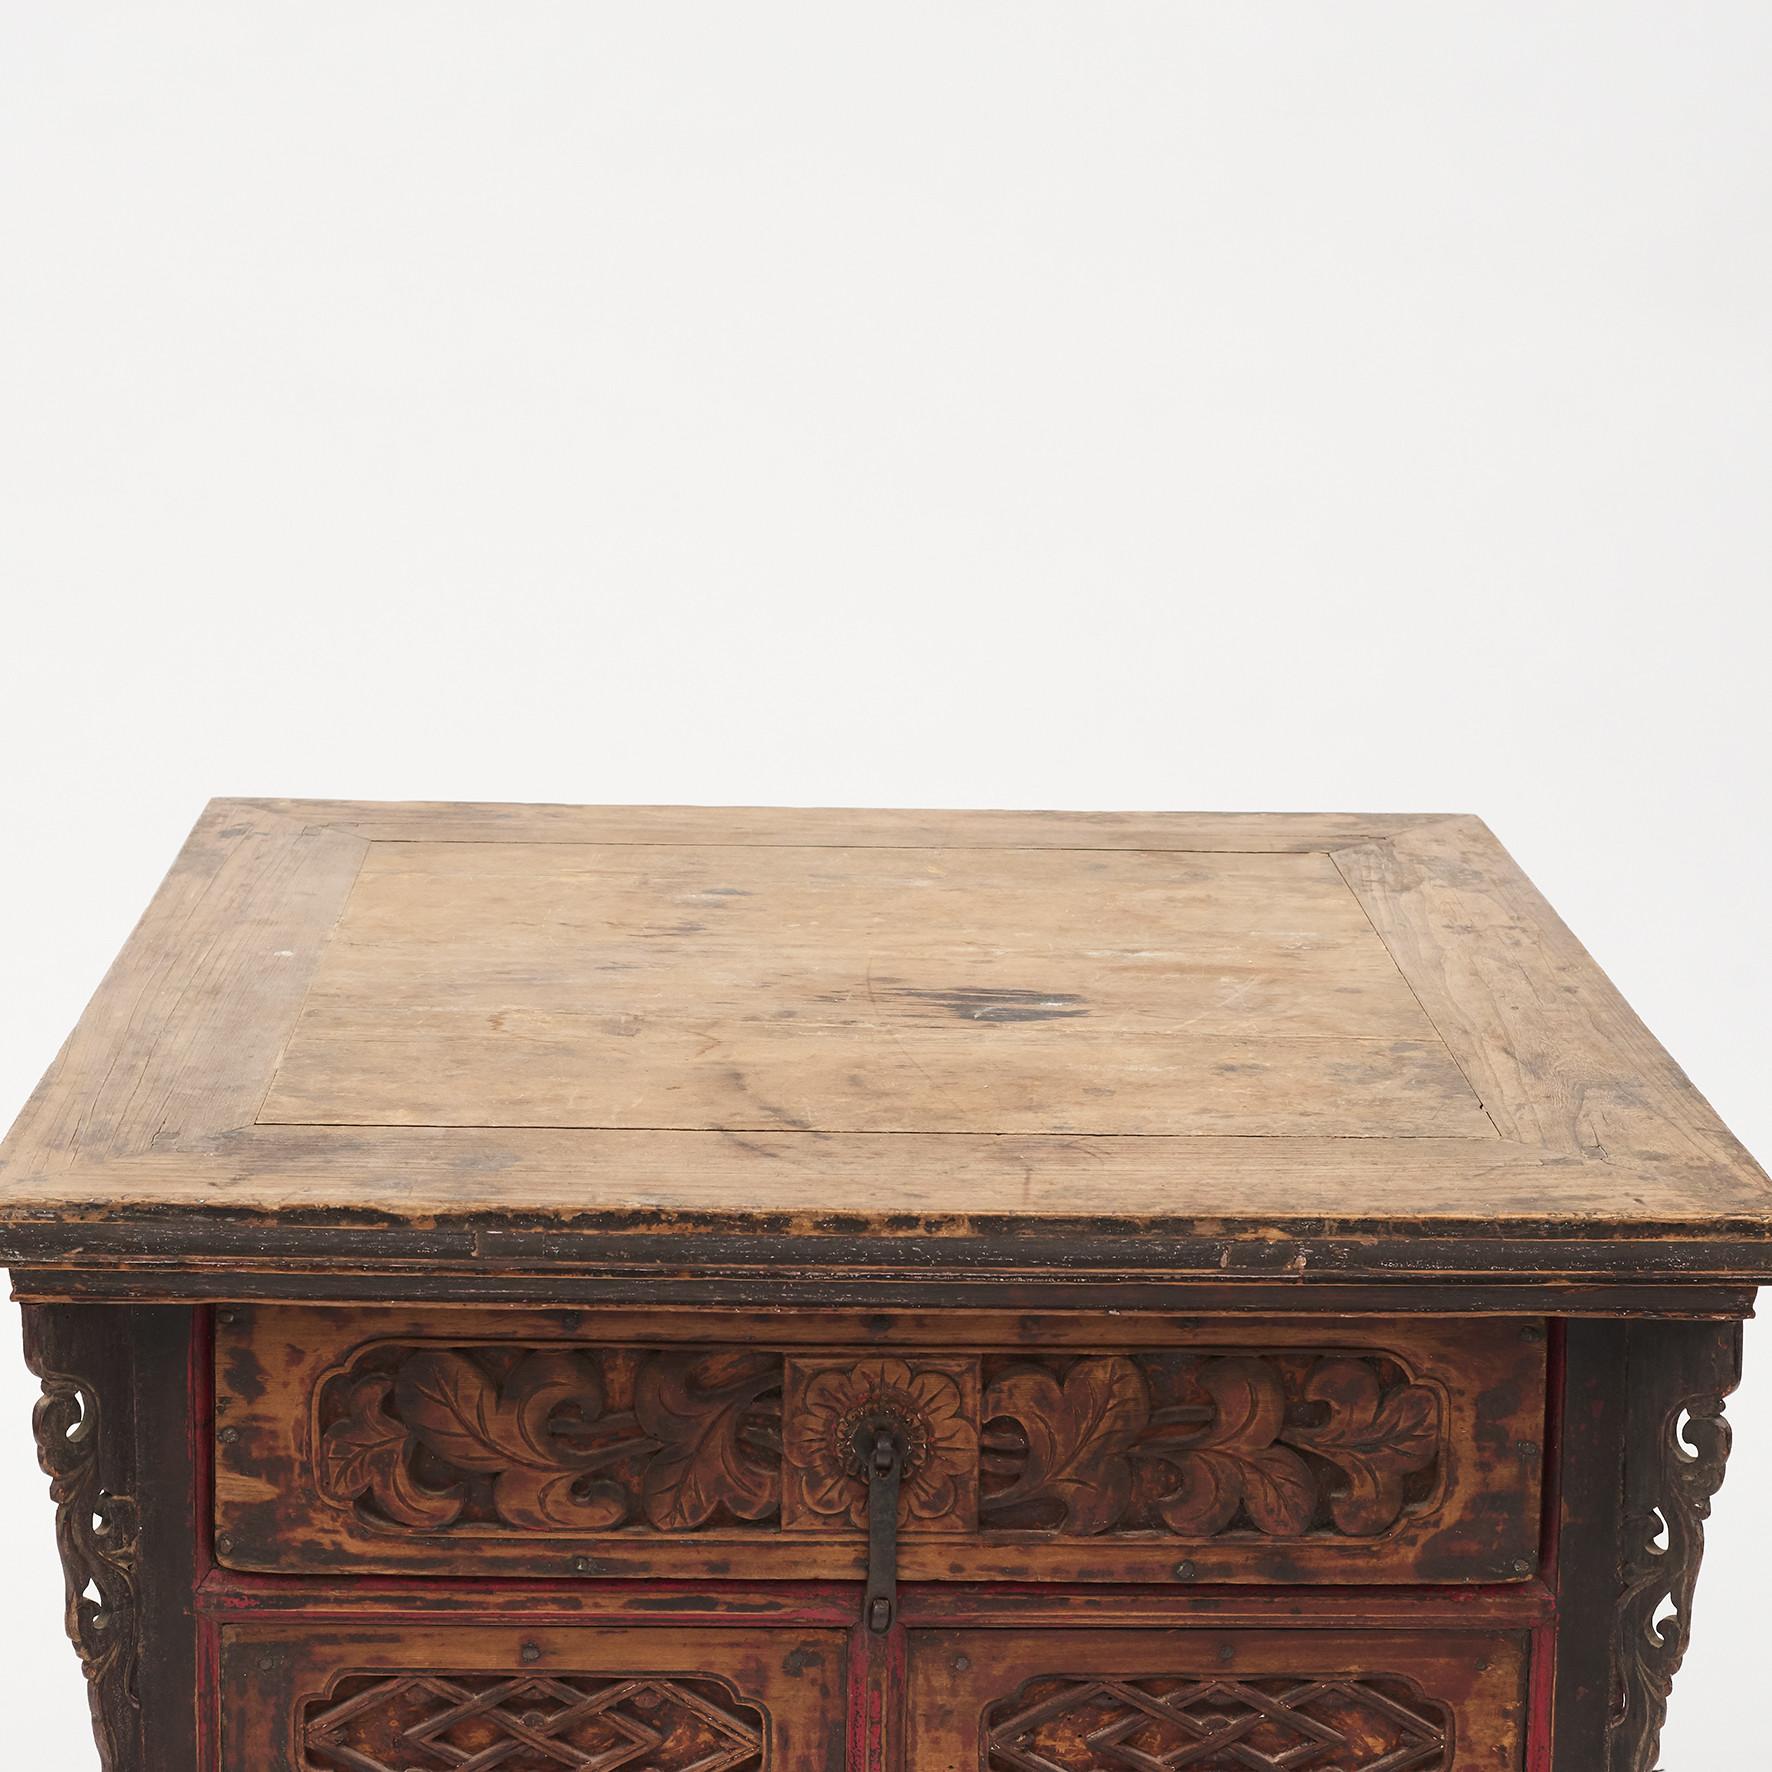 Lacquered 16th-17th Century Chinese Pine Center Table with Carvings and Decorations For Sale